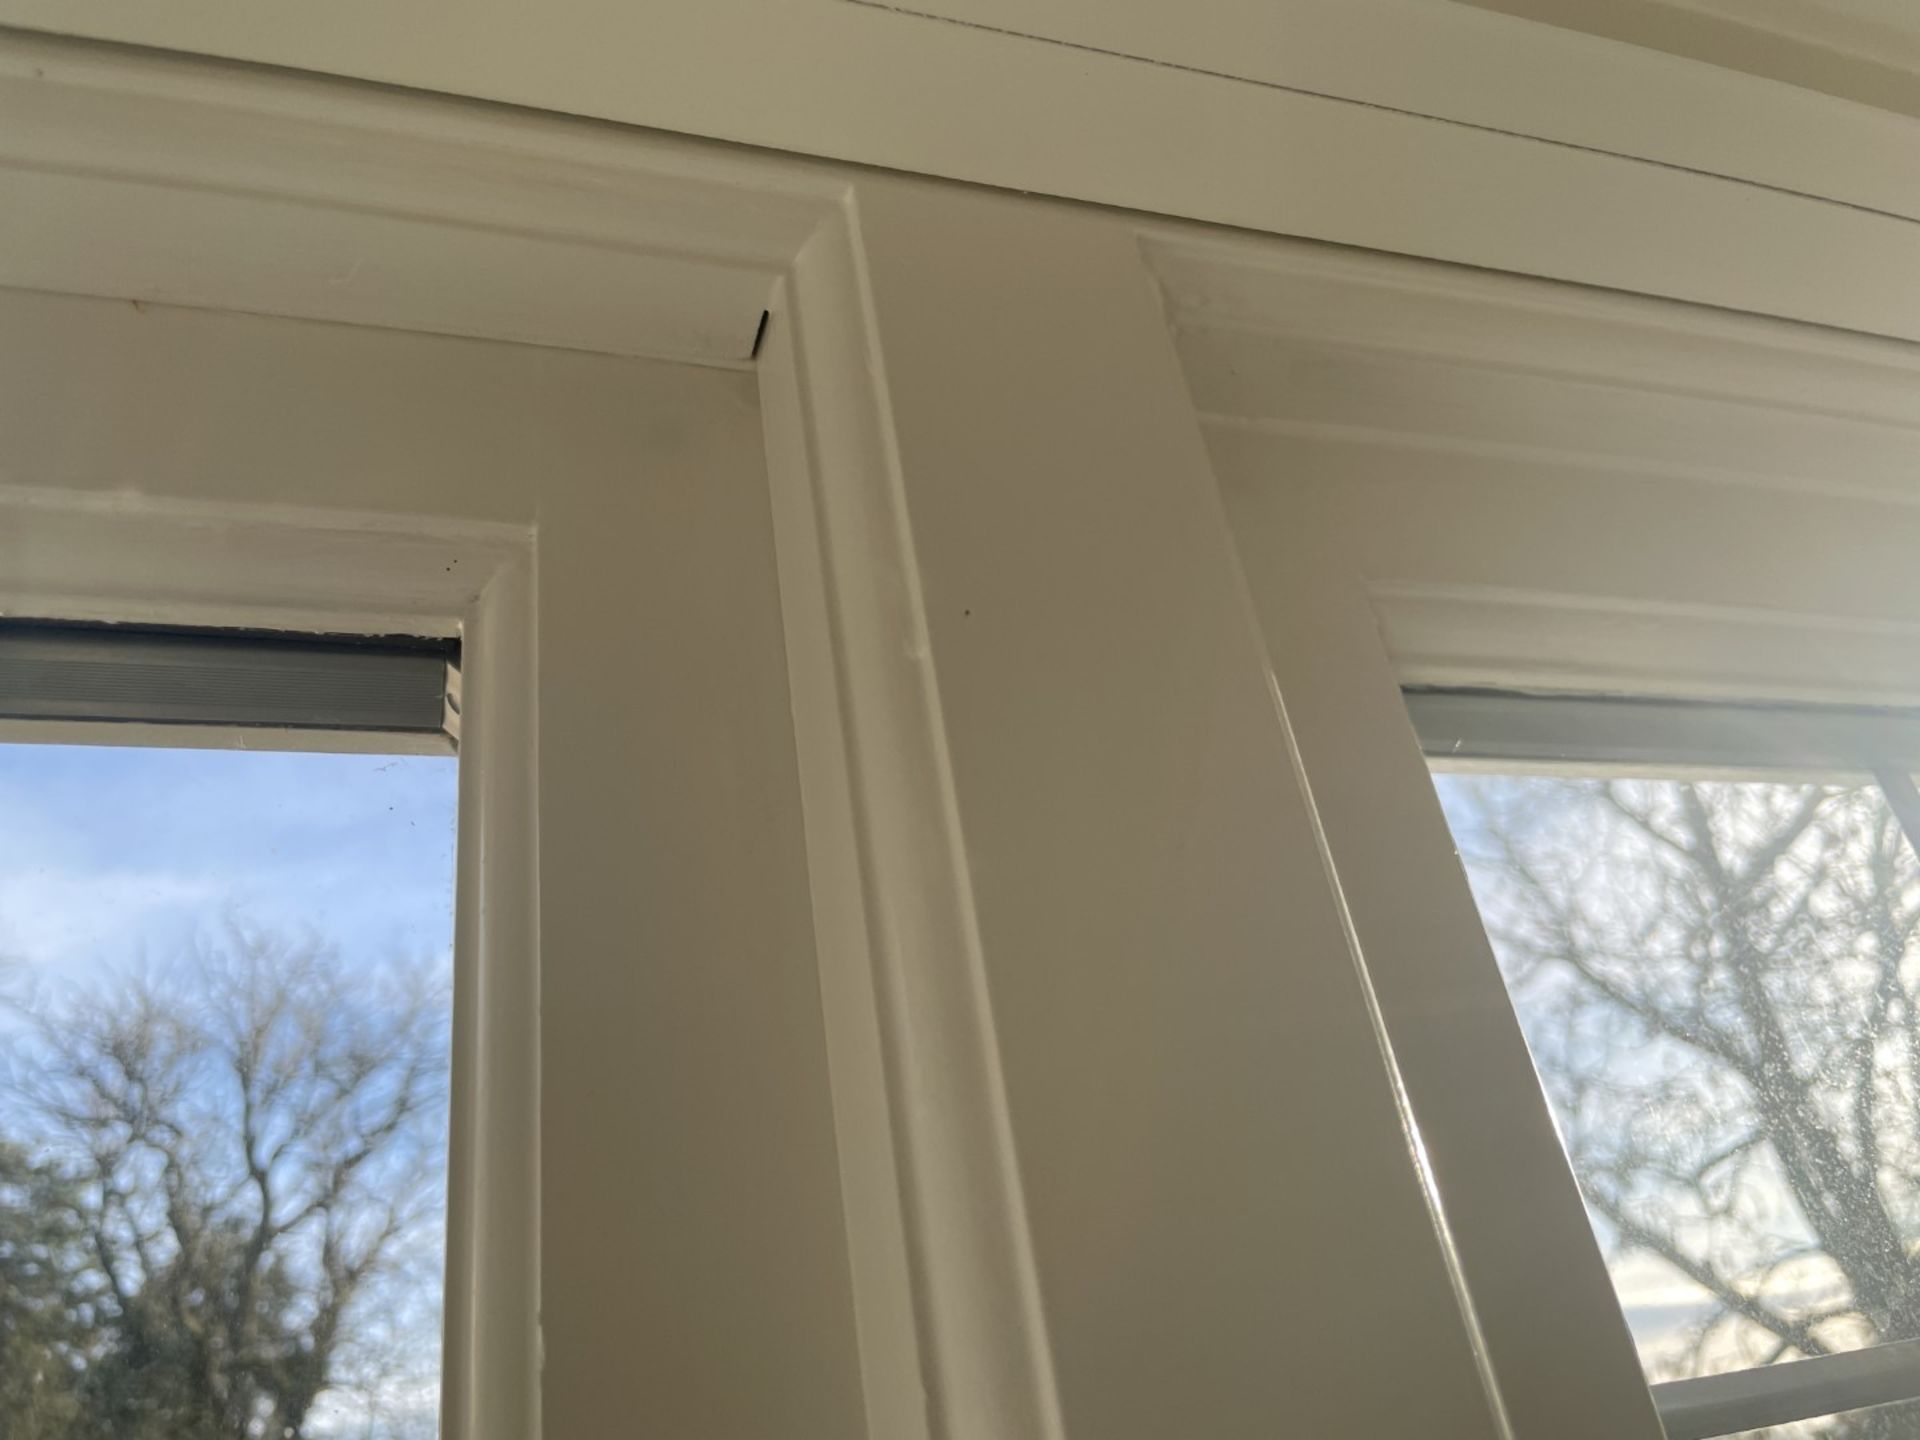 1 x Hardwood Timber Double Glazed Window Frames fitted with Shutter Blinds, In White - Ref: PAN101 - Image 16 of 23